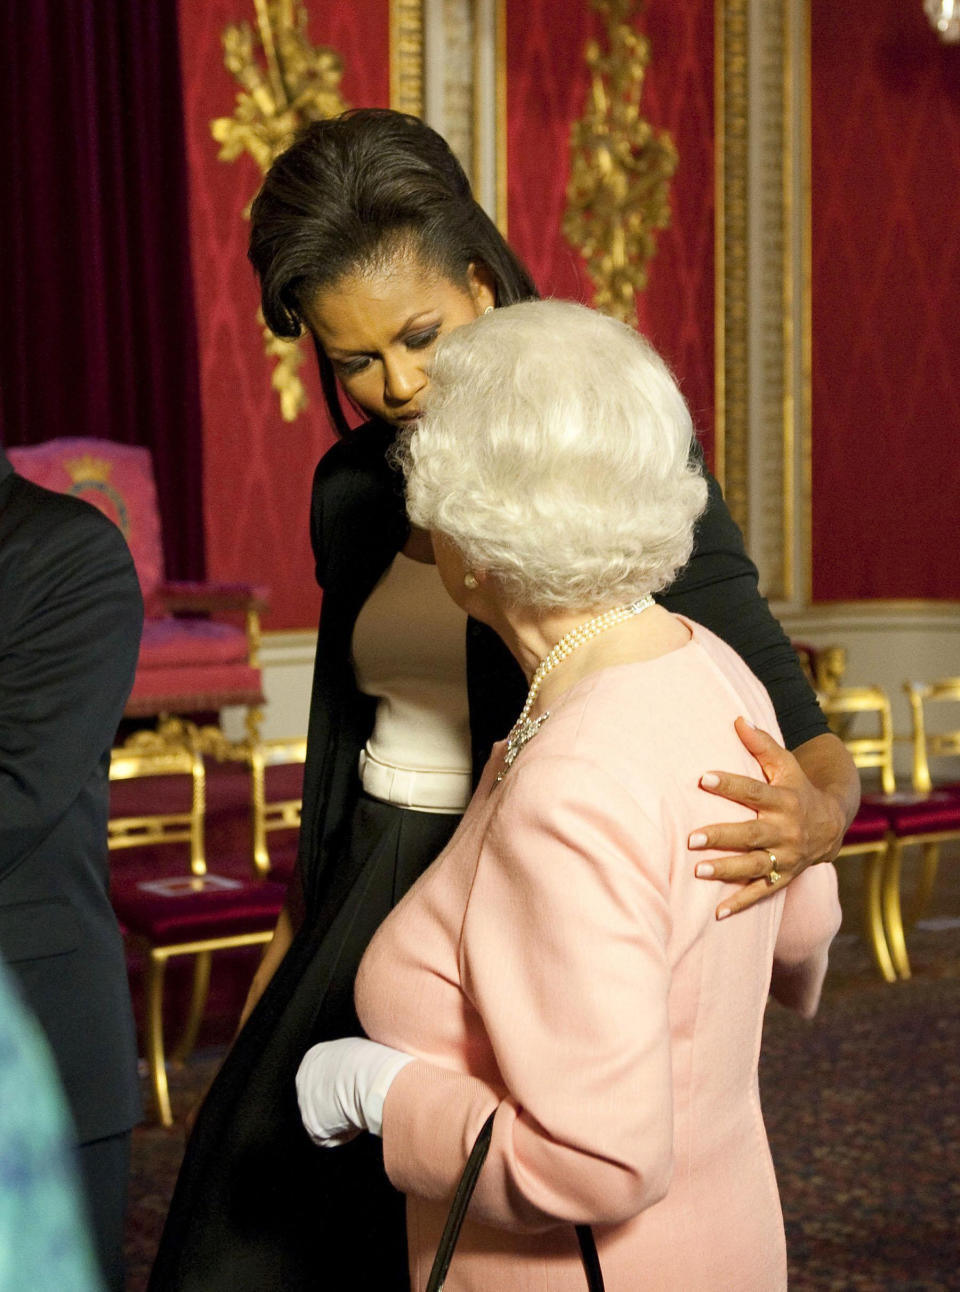 Michelle Obama puts her arm around the Queen at a reception at Buckingham Palace, London, 2009. (PA Images)